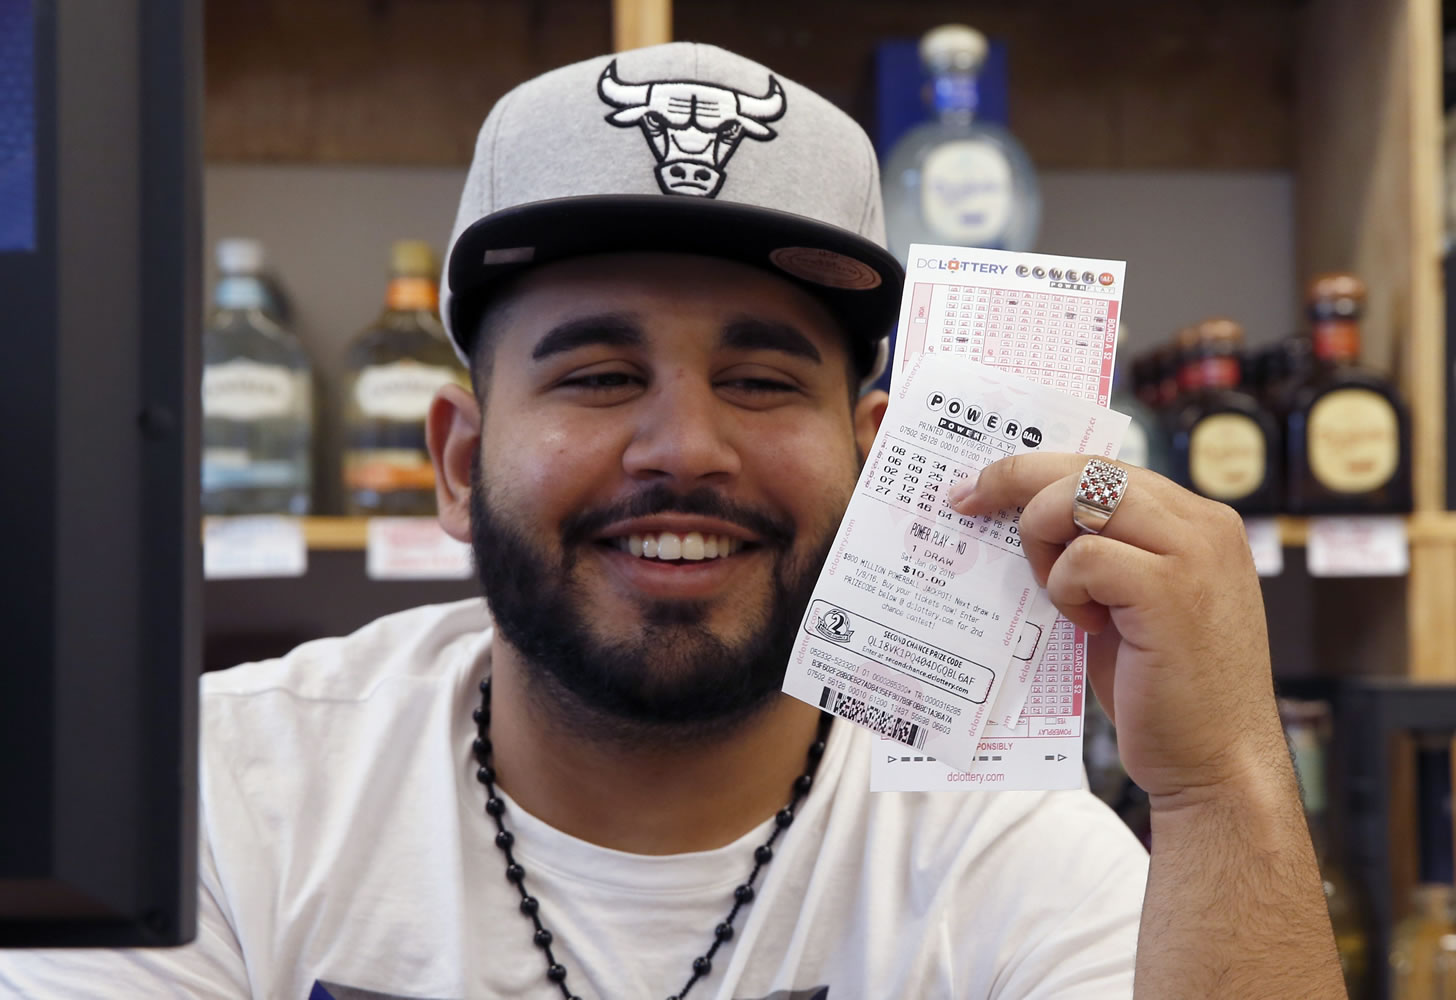 Samir Akhter, the owner of Penn Branch Liquor, smiles as he holds up Powerball tickets that he just sold, Saturday, Jan. 9, 2016 in Washington. Officials say it's increasingly likely that someone will win the $900 million Powerball jackpot, which grew by $100 million just hours before Saturday night's drawing.